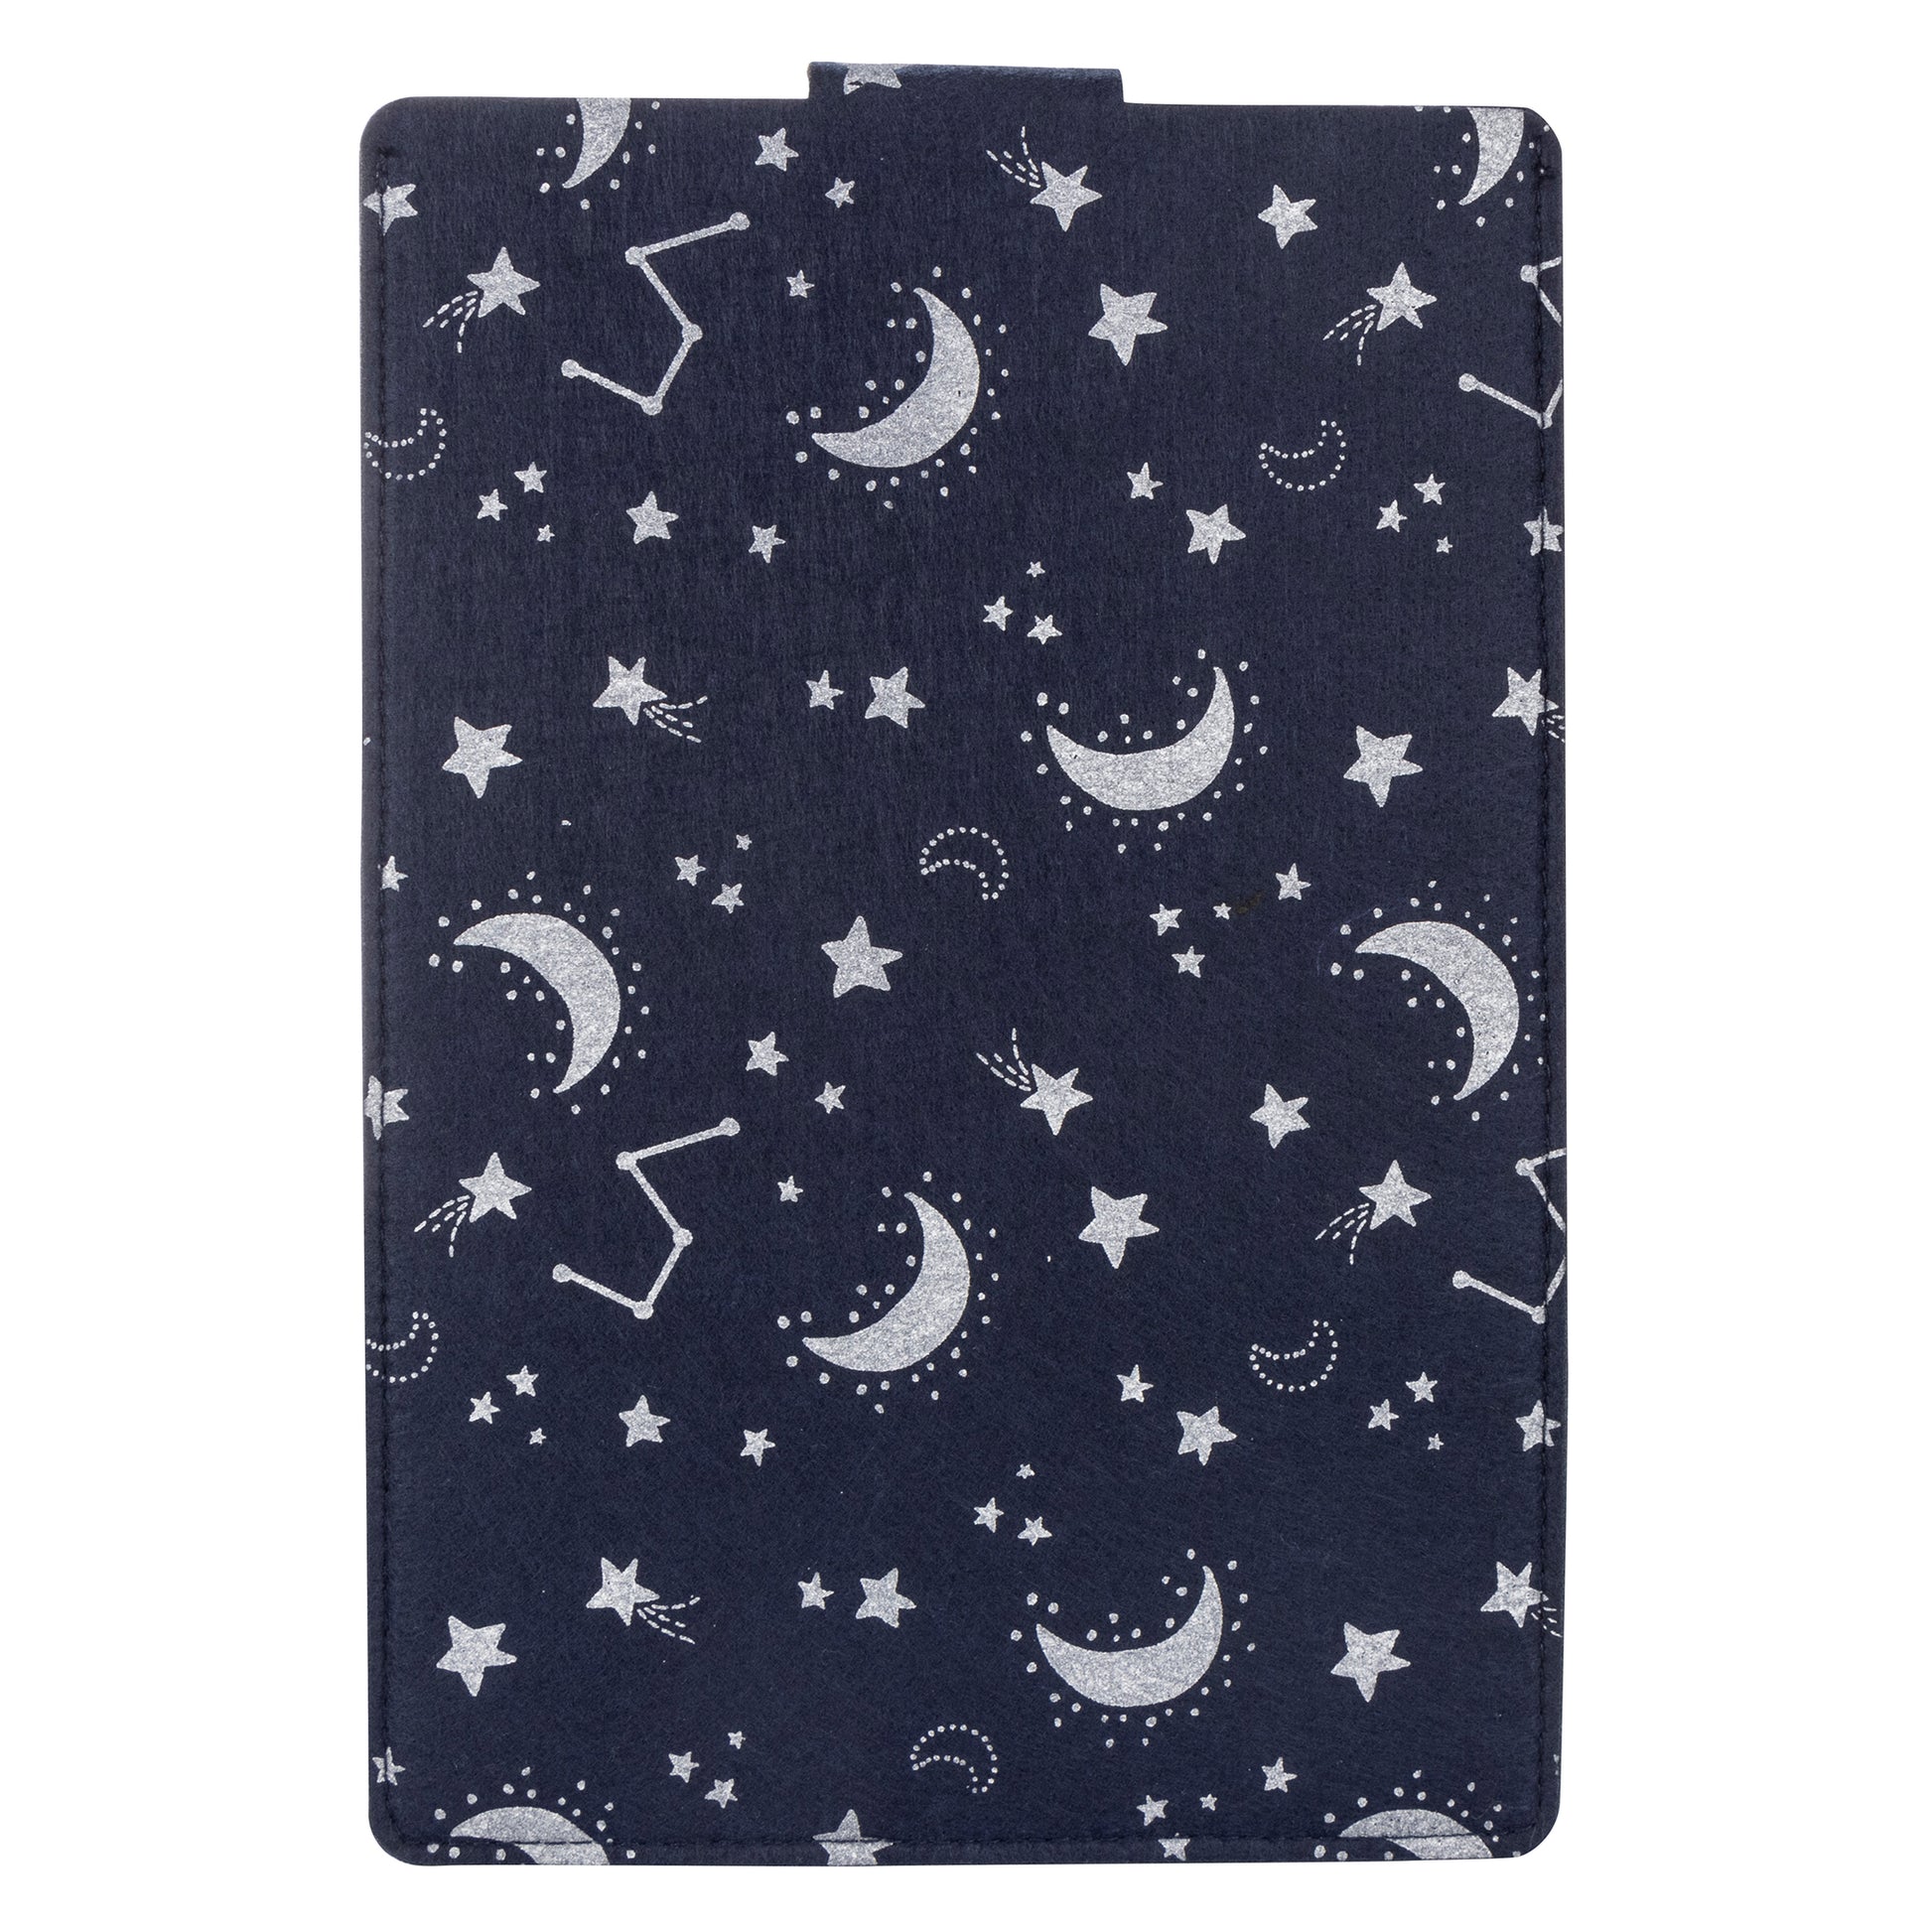  Constellation Felt Tablet Sleeve Carrying Case - back view